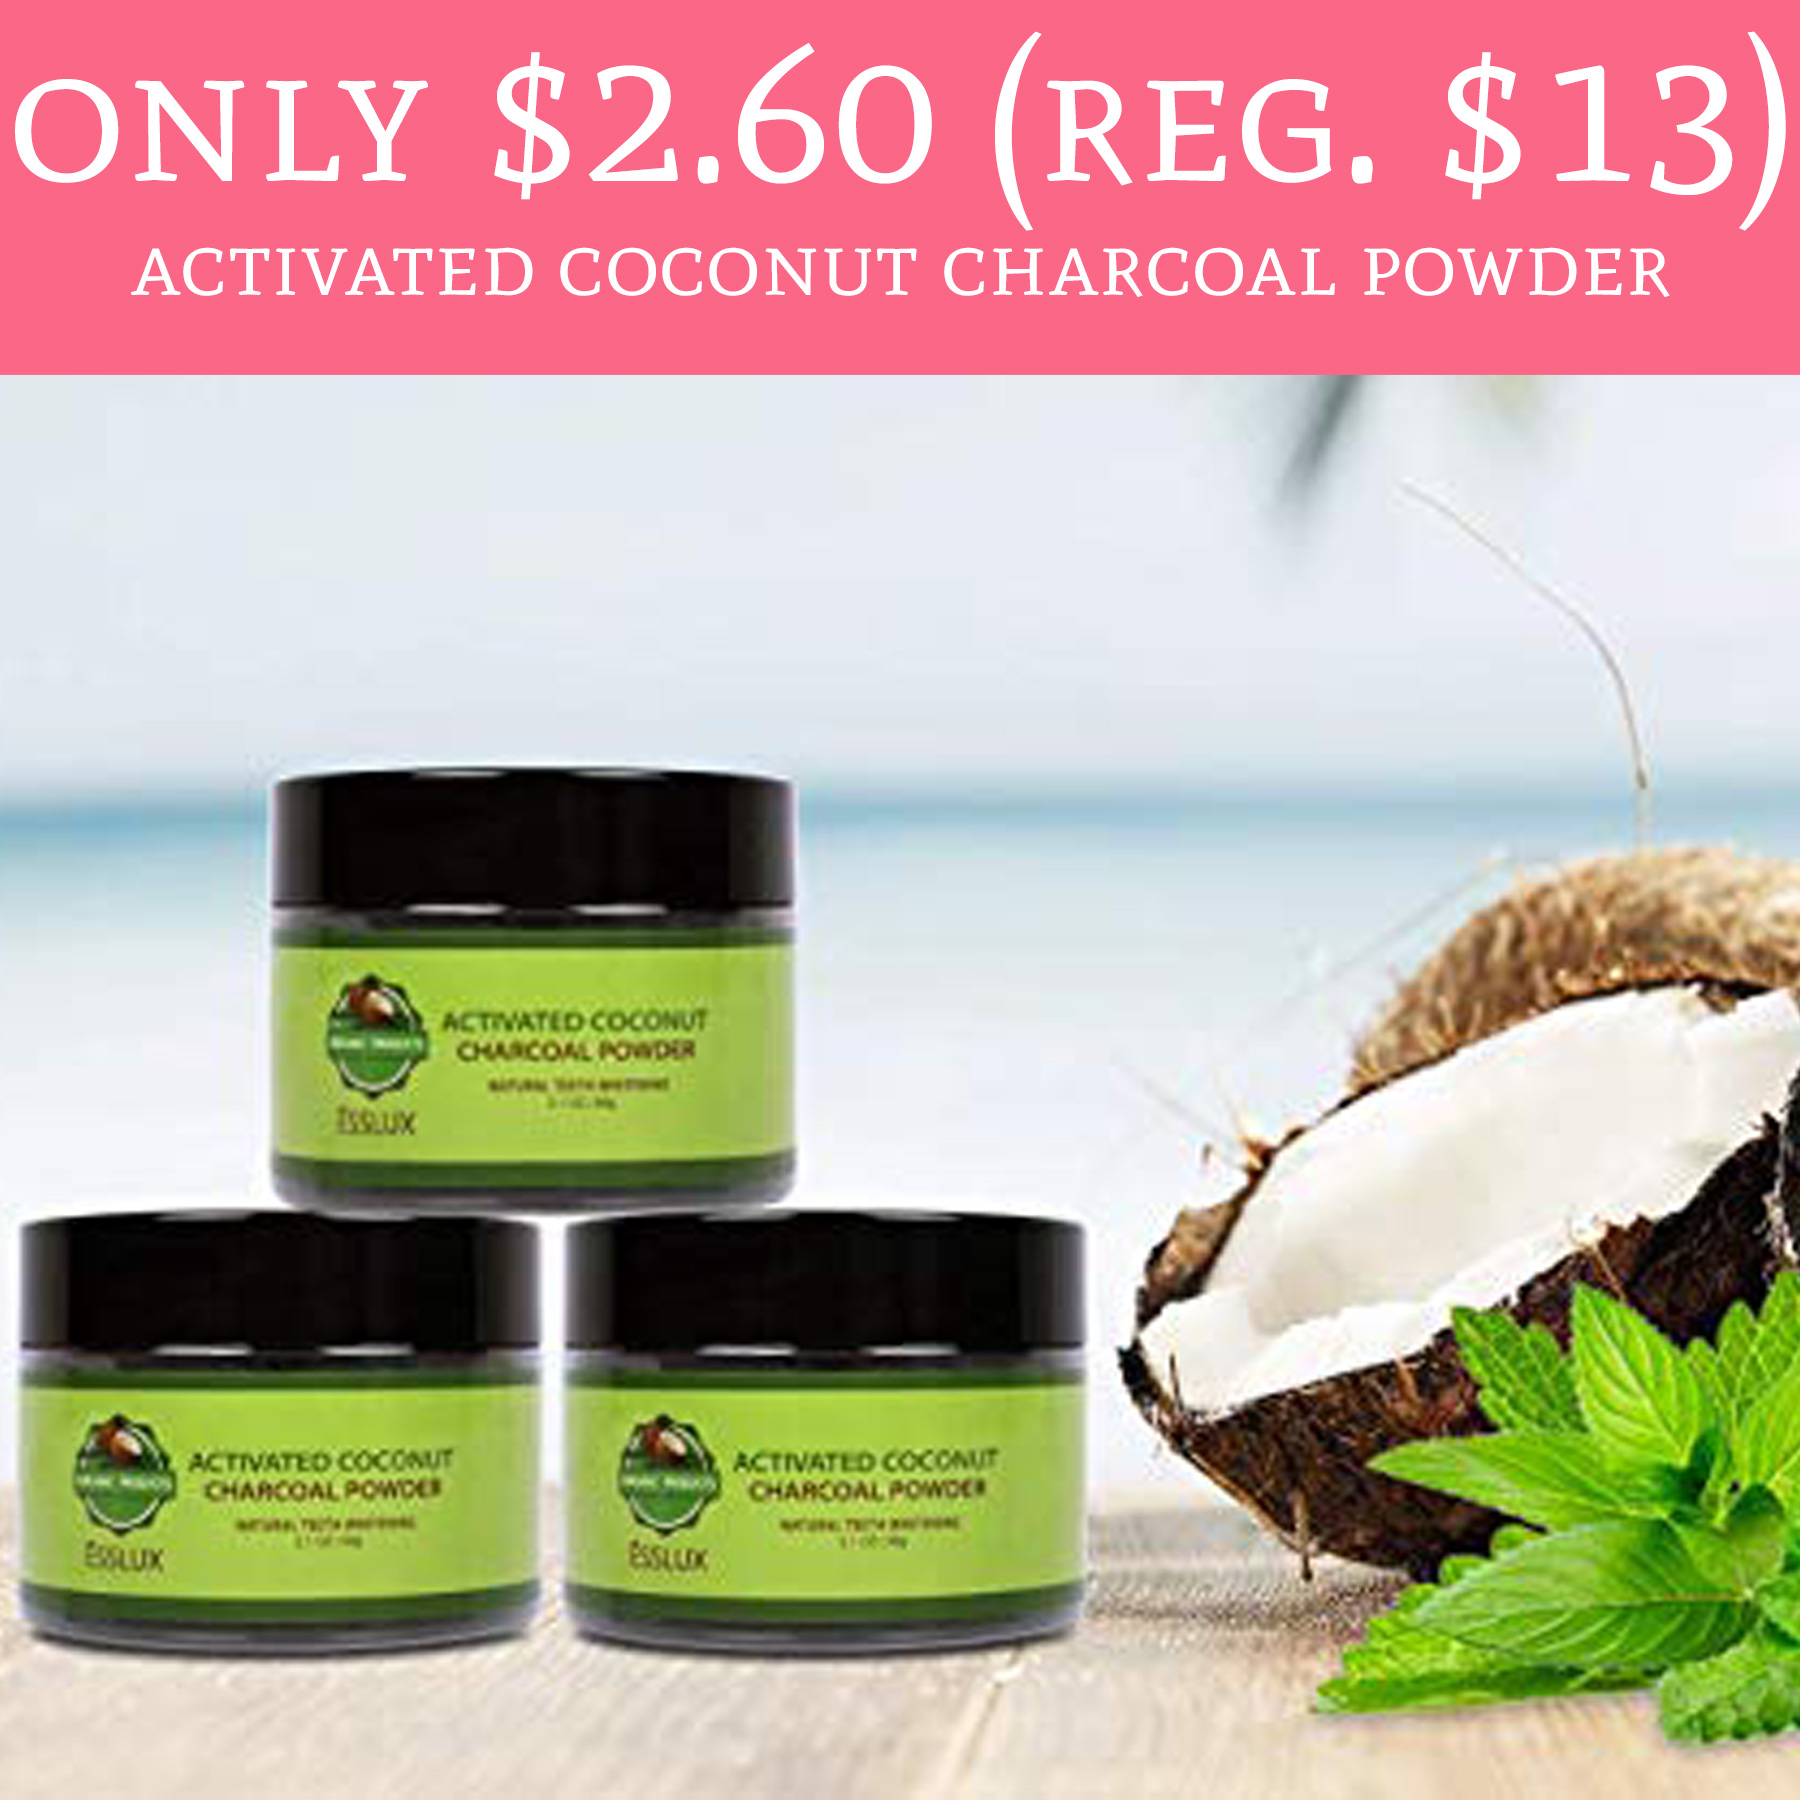 activated-coconut-charcoal-powder-1